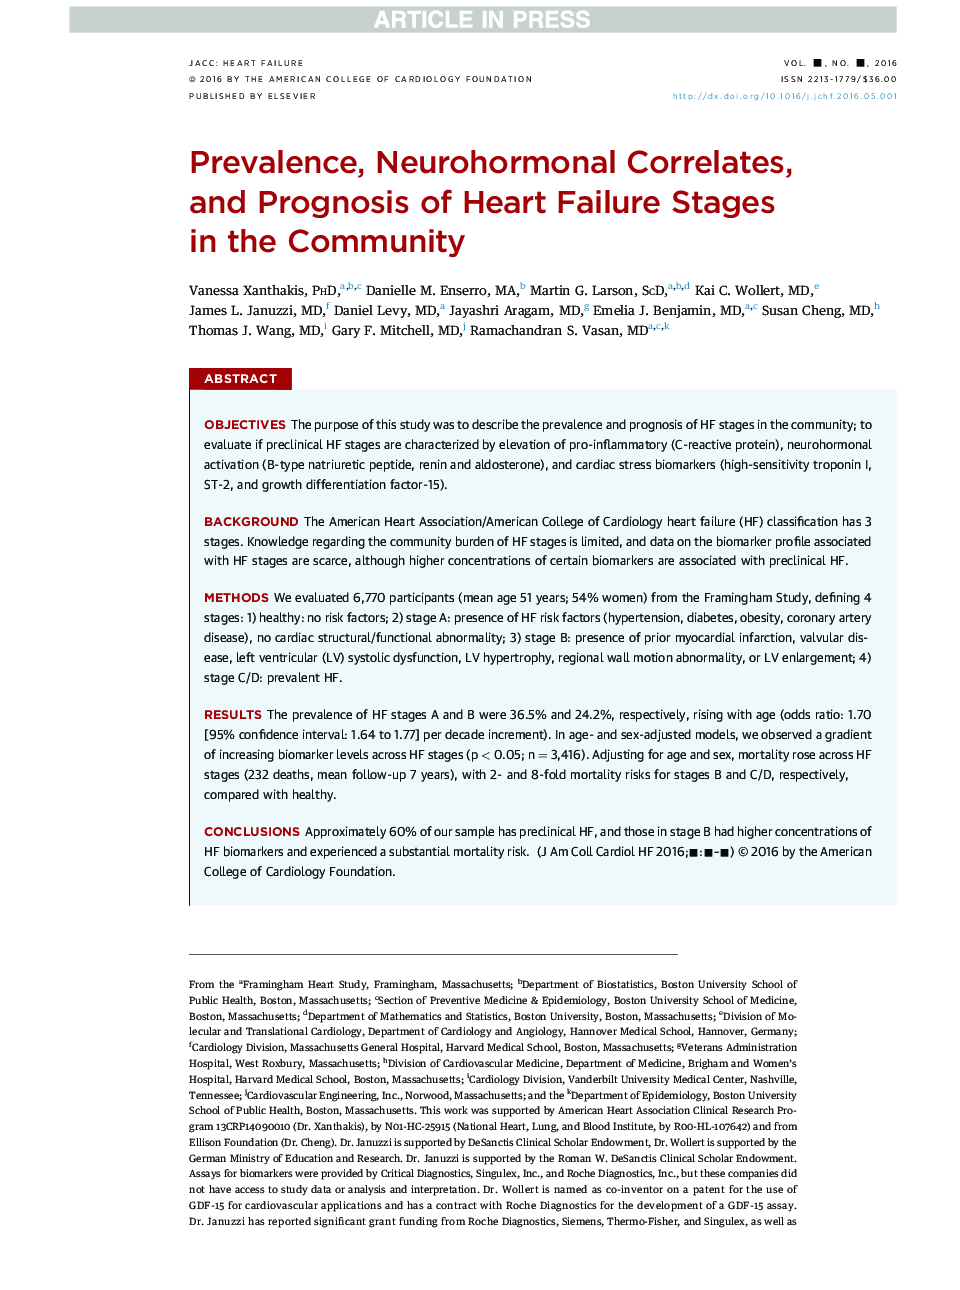 Prevalence, Neurohormonal Correlates, and Prognosis of Heart Failure Stages inÂ the Community